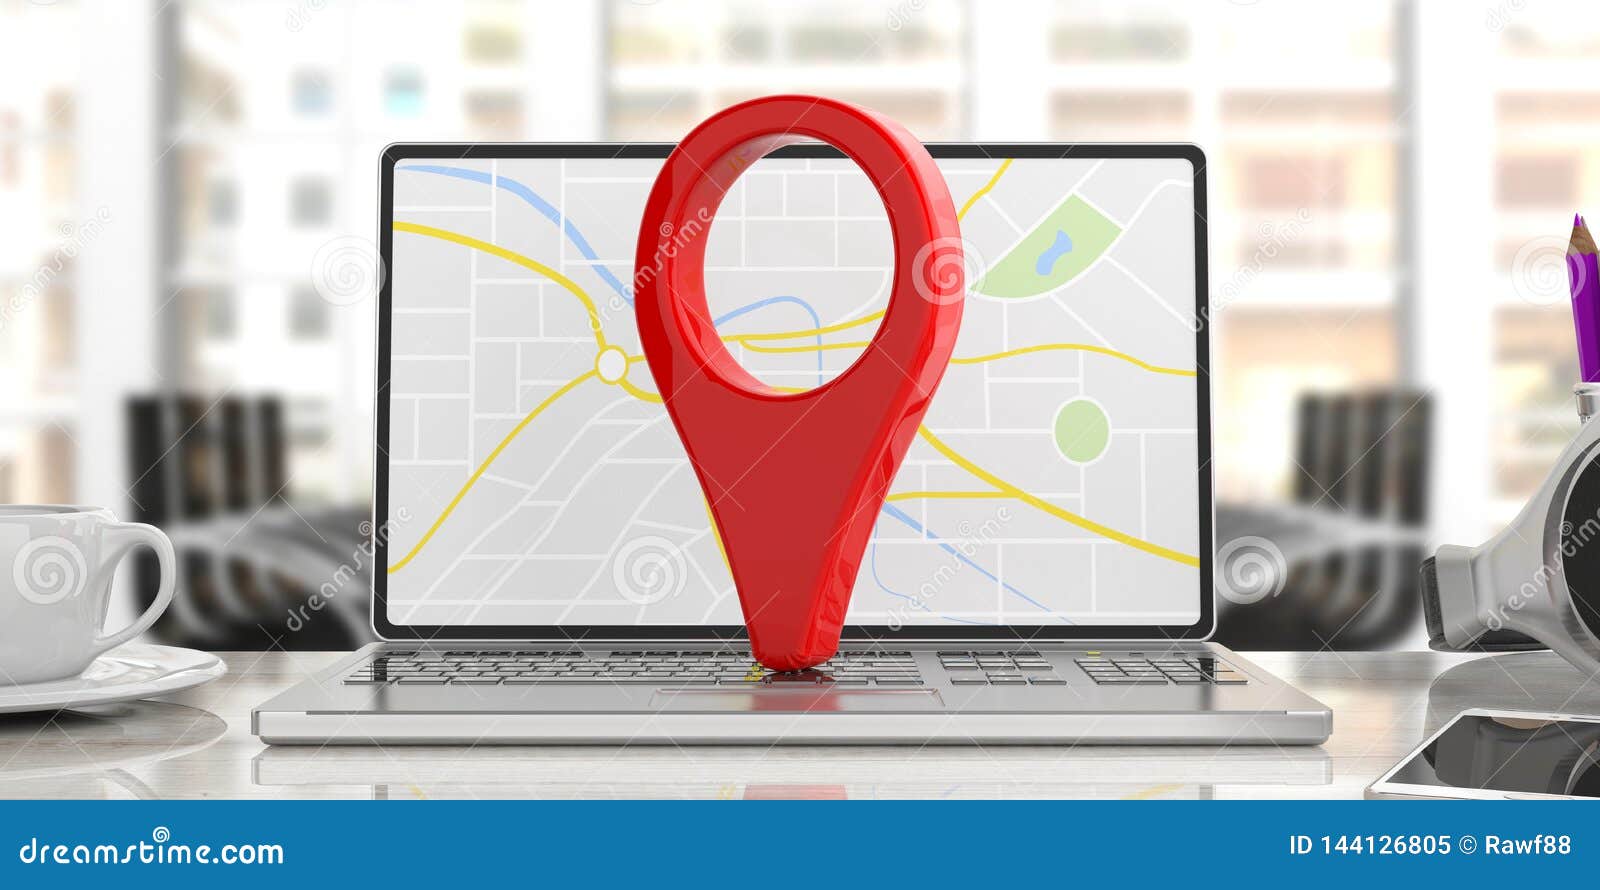 Location Marker On Laptop Map On The Screen Business Background 3d Illustration Stock Illustration Illustration Of Destination Marker 144126805